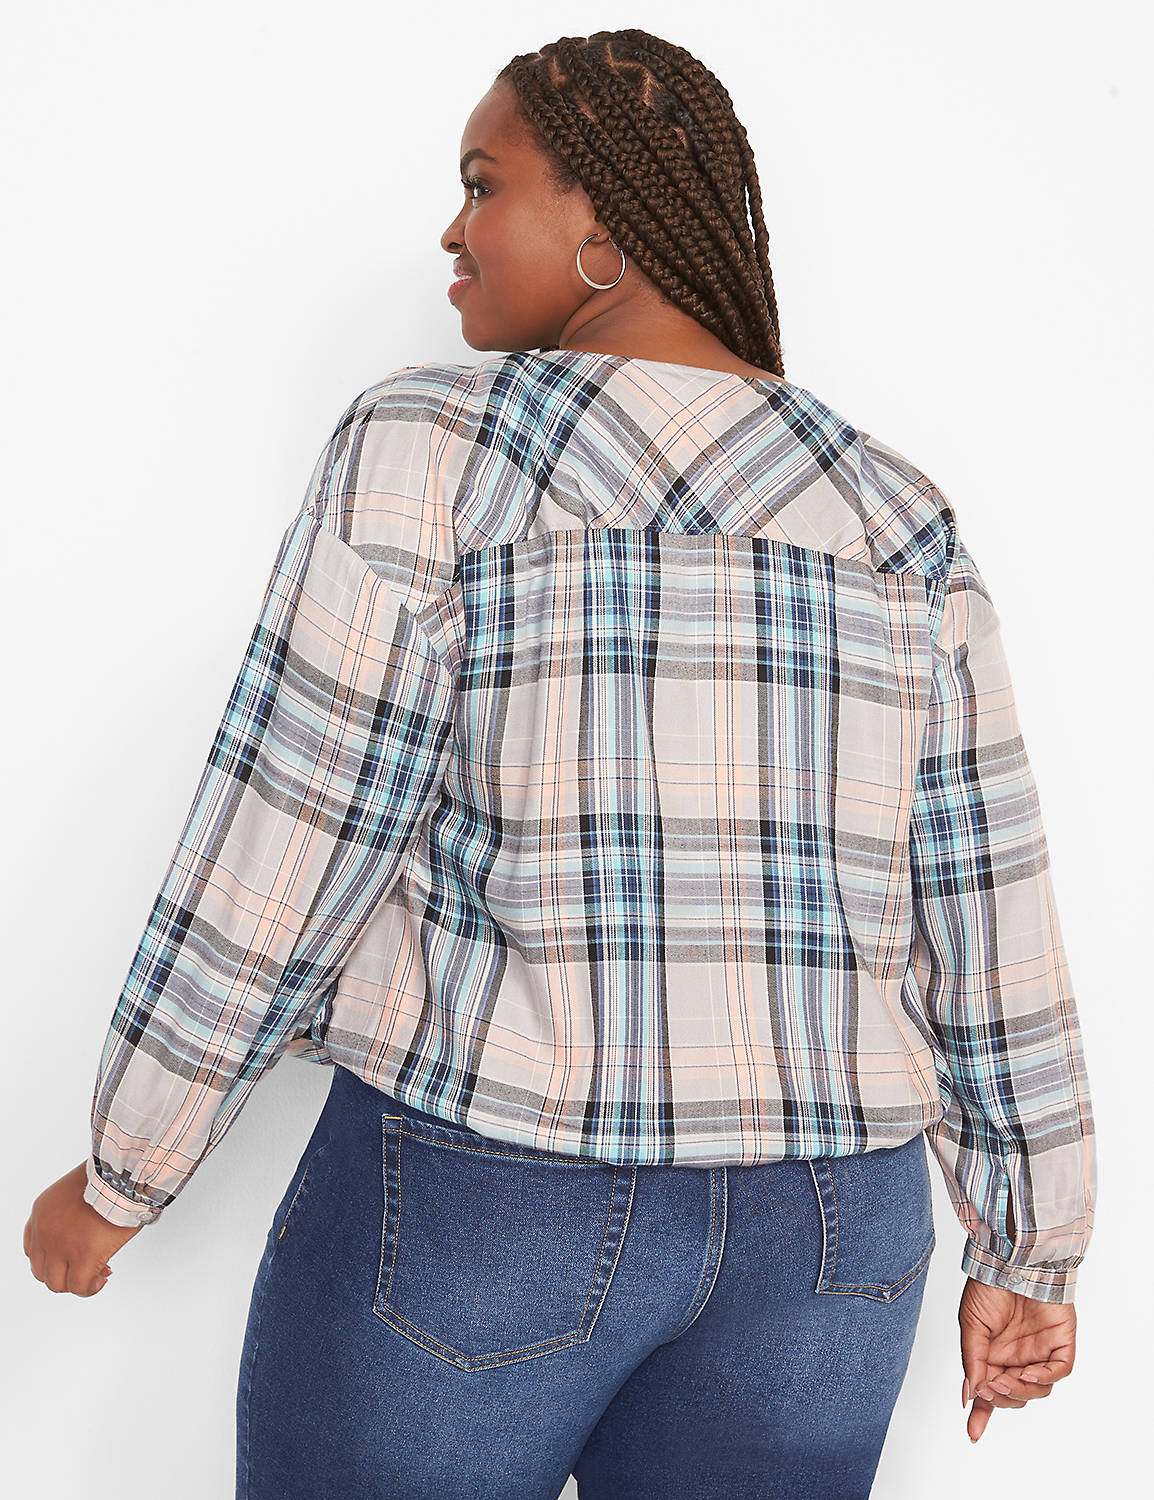 Long Sleeve V Neck Button Front Plaid Control Volume Top 1124020:LBH21214_AmyPlaid_CW19:10/12 Product Image 2